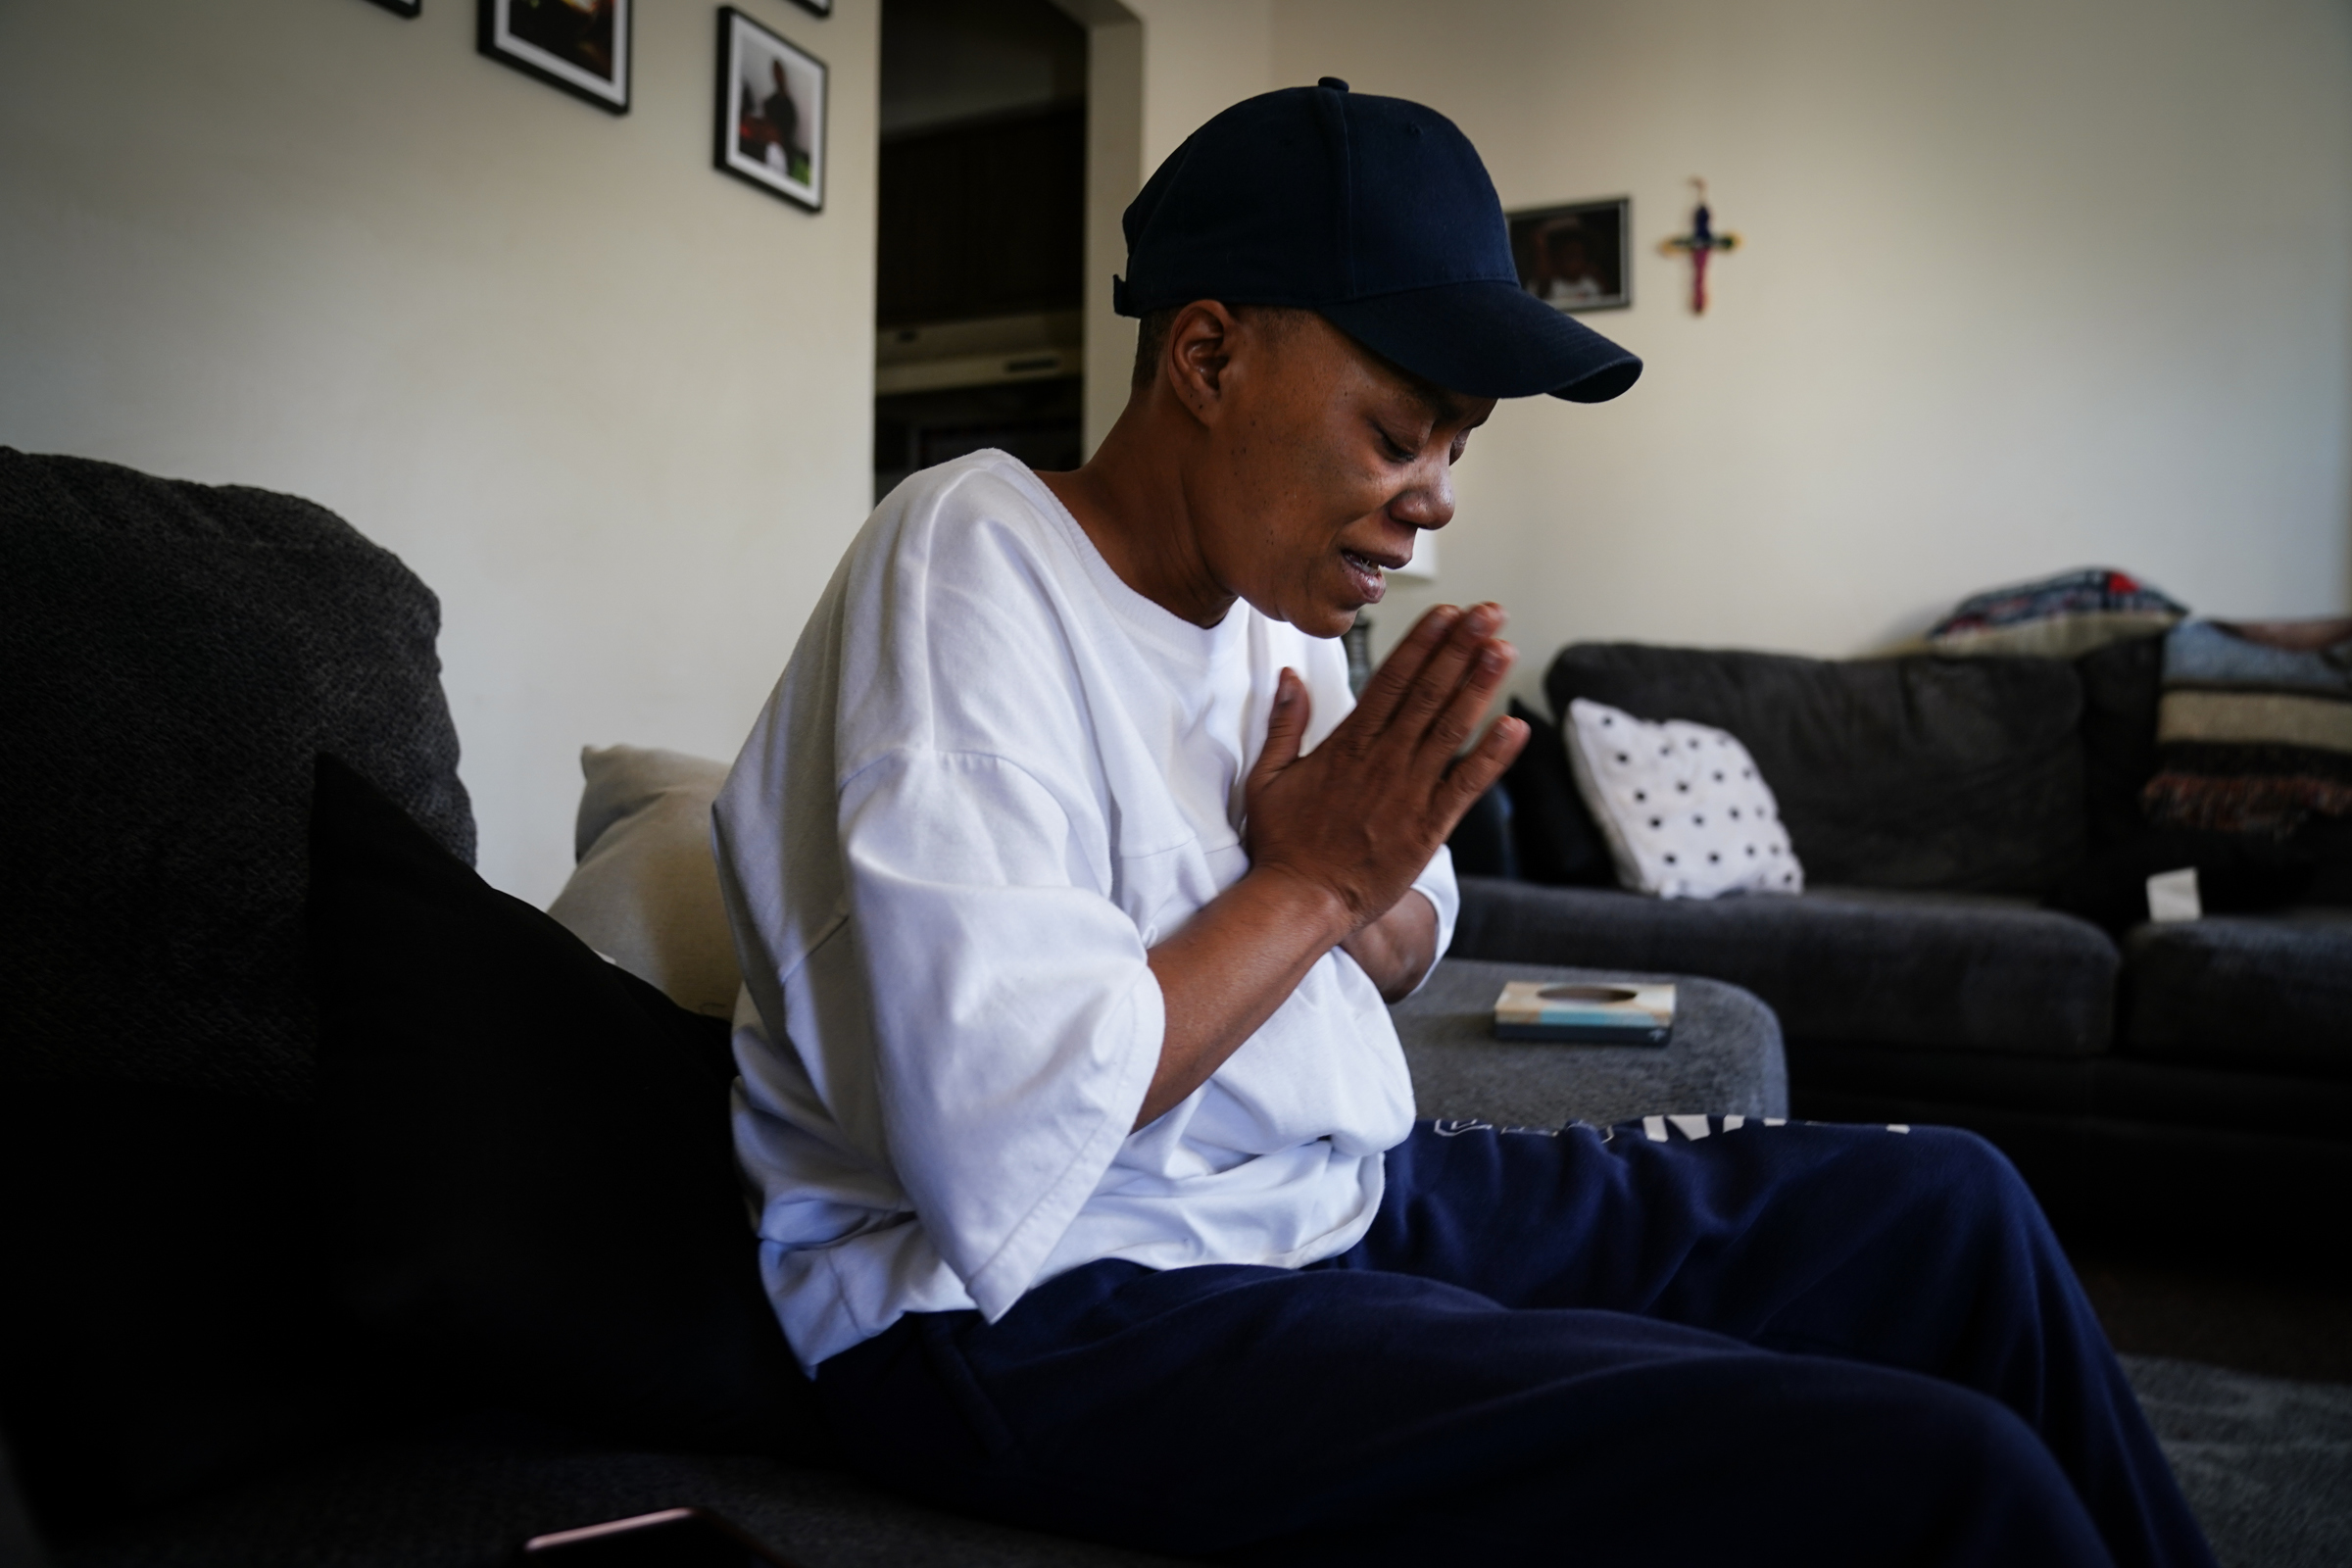 Josette Phillips prays for her son Donyea Phillips at her home in Spring City, Pa. She says he told her when he was arrested about abuse by detectives, but she saw no recourse.